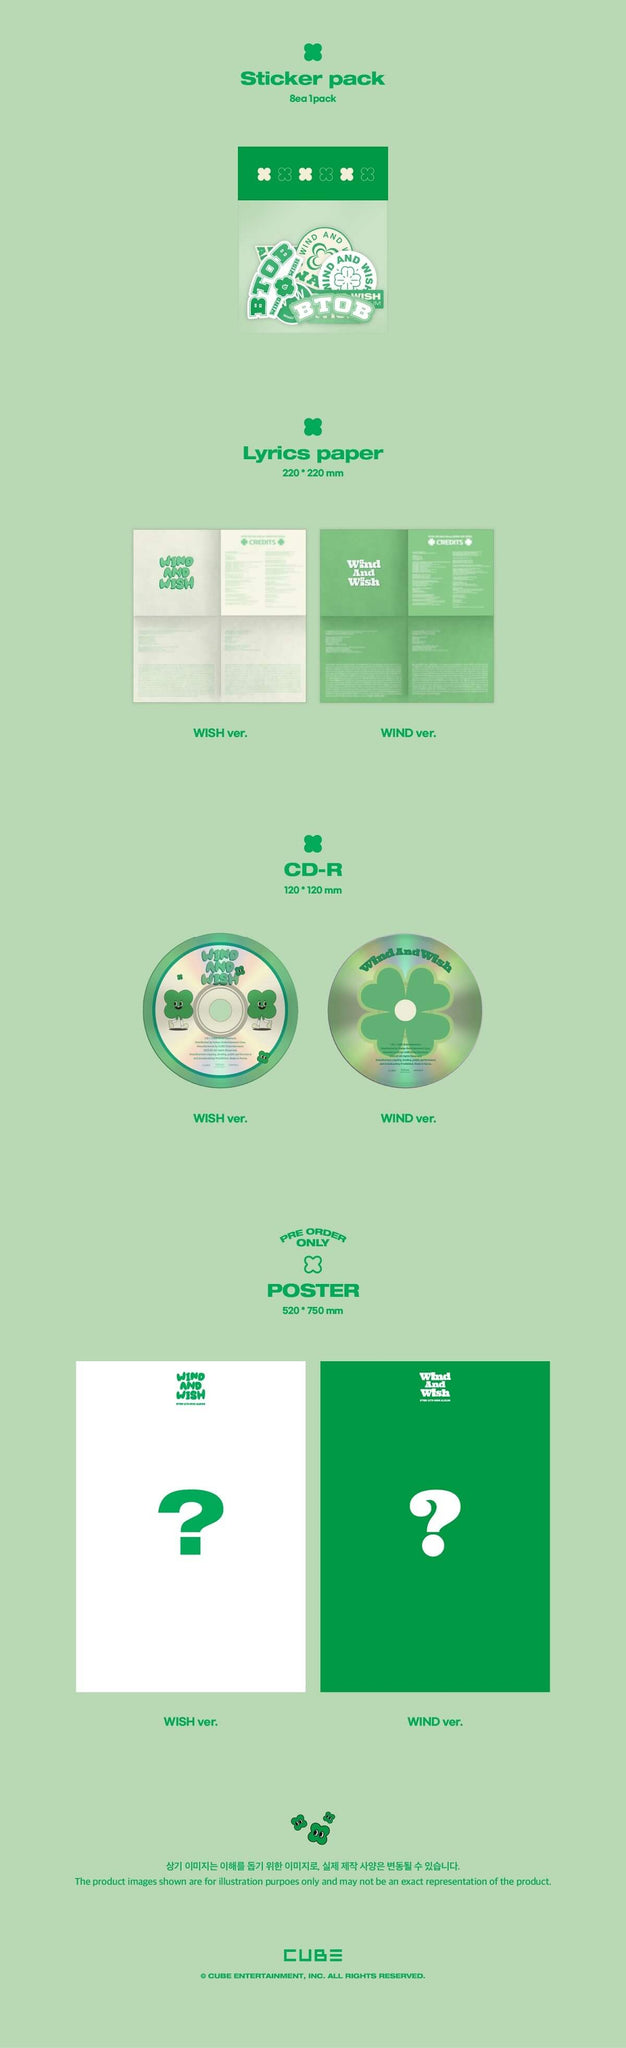 BTOB WIND AND WISH Inclusions Sticker Pack Lyrics Paper CD Pre-order Only Poster